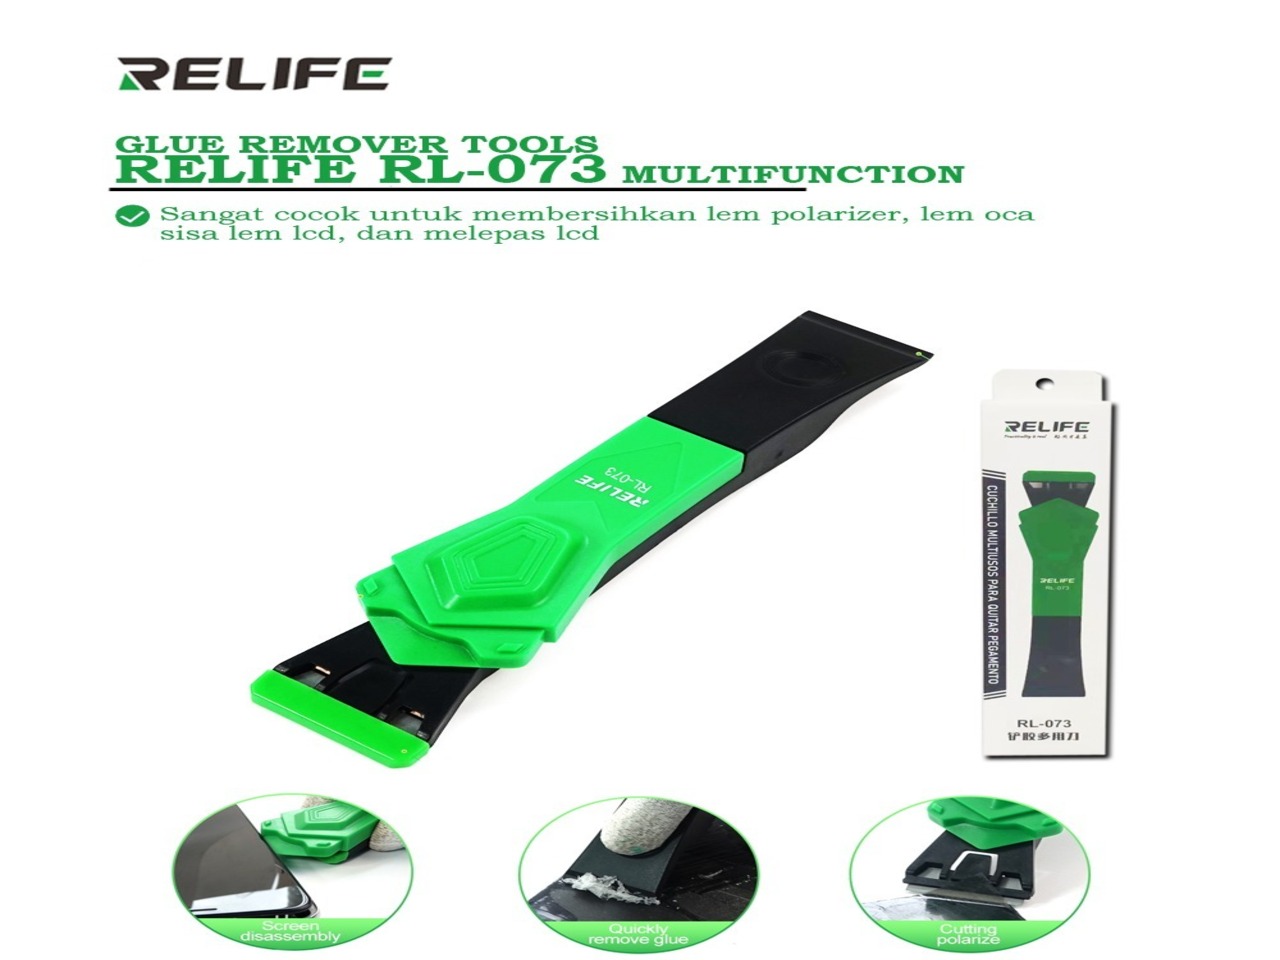 GLUE-REMOVER-RELIFE-RL-073-MULTIFUNCTION